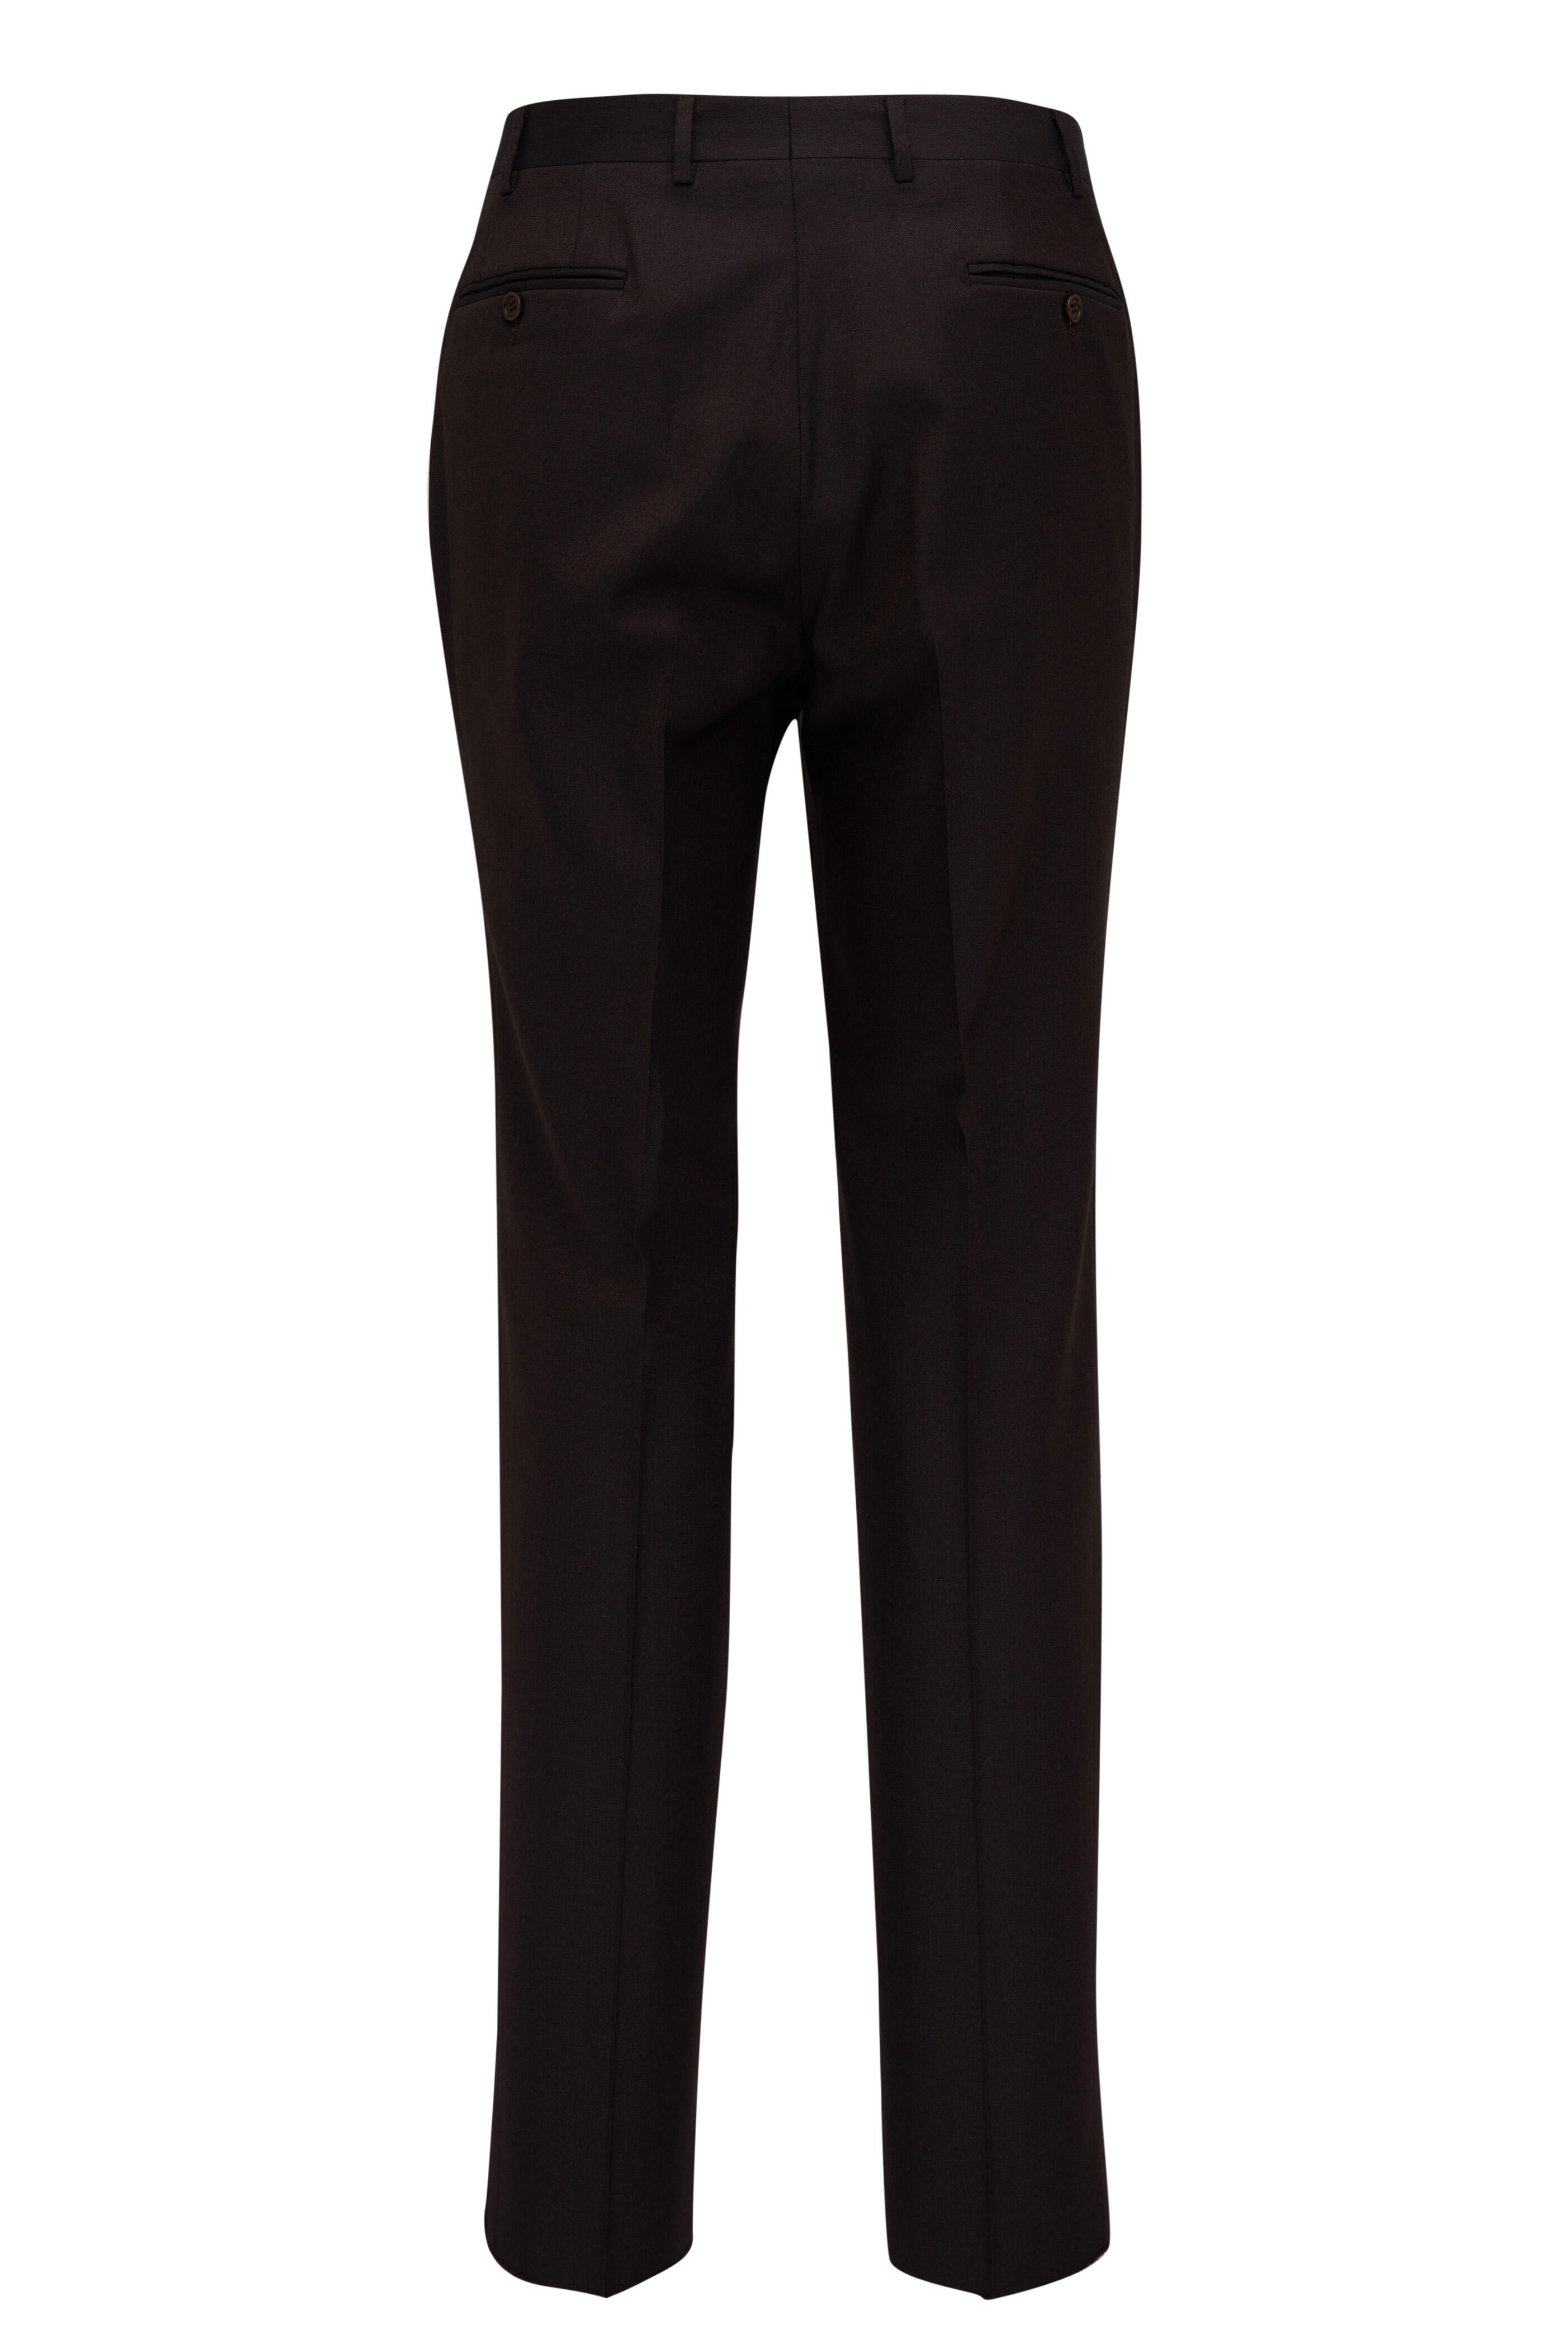 Canali - Brown Stretch Wool Dress Pant | Mitchell Stores